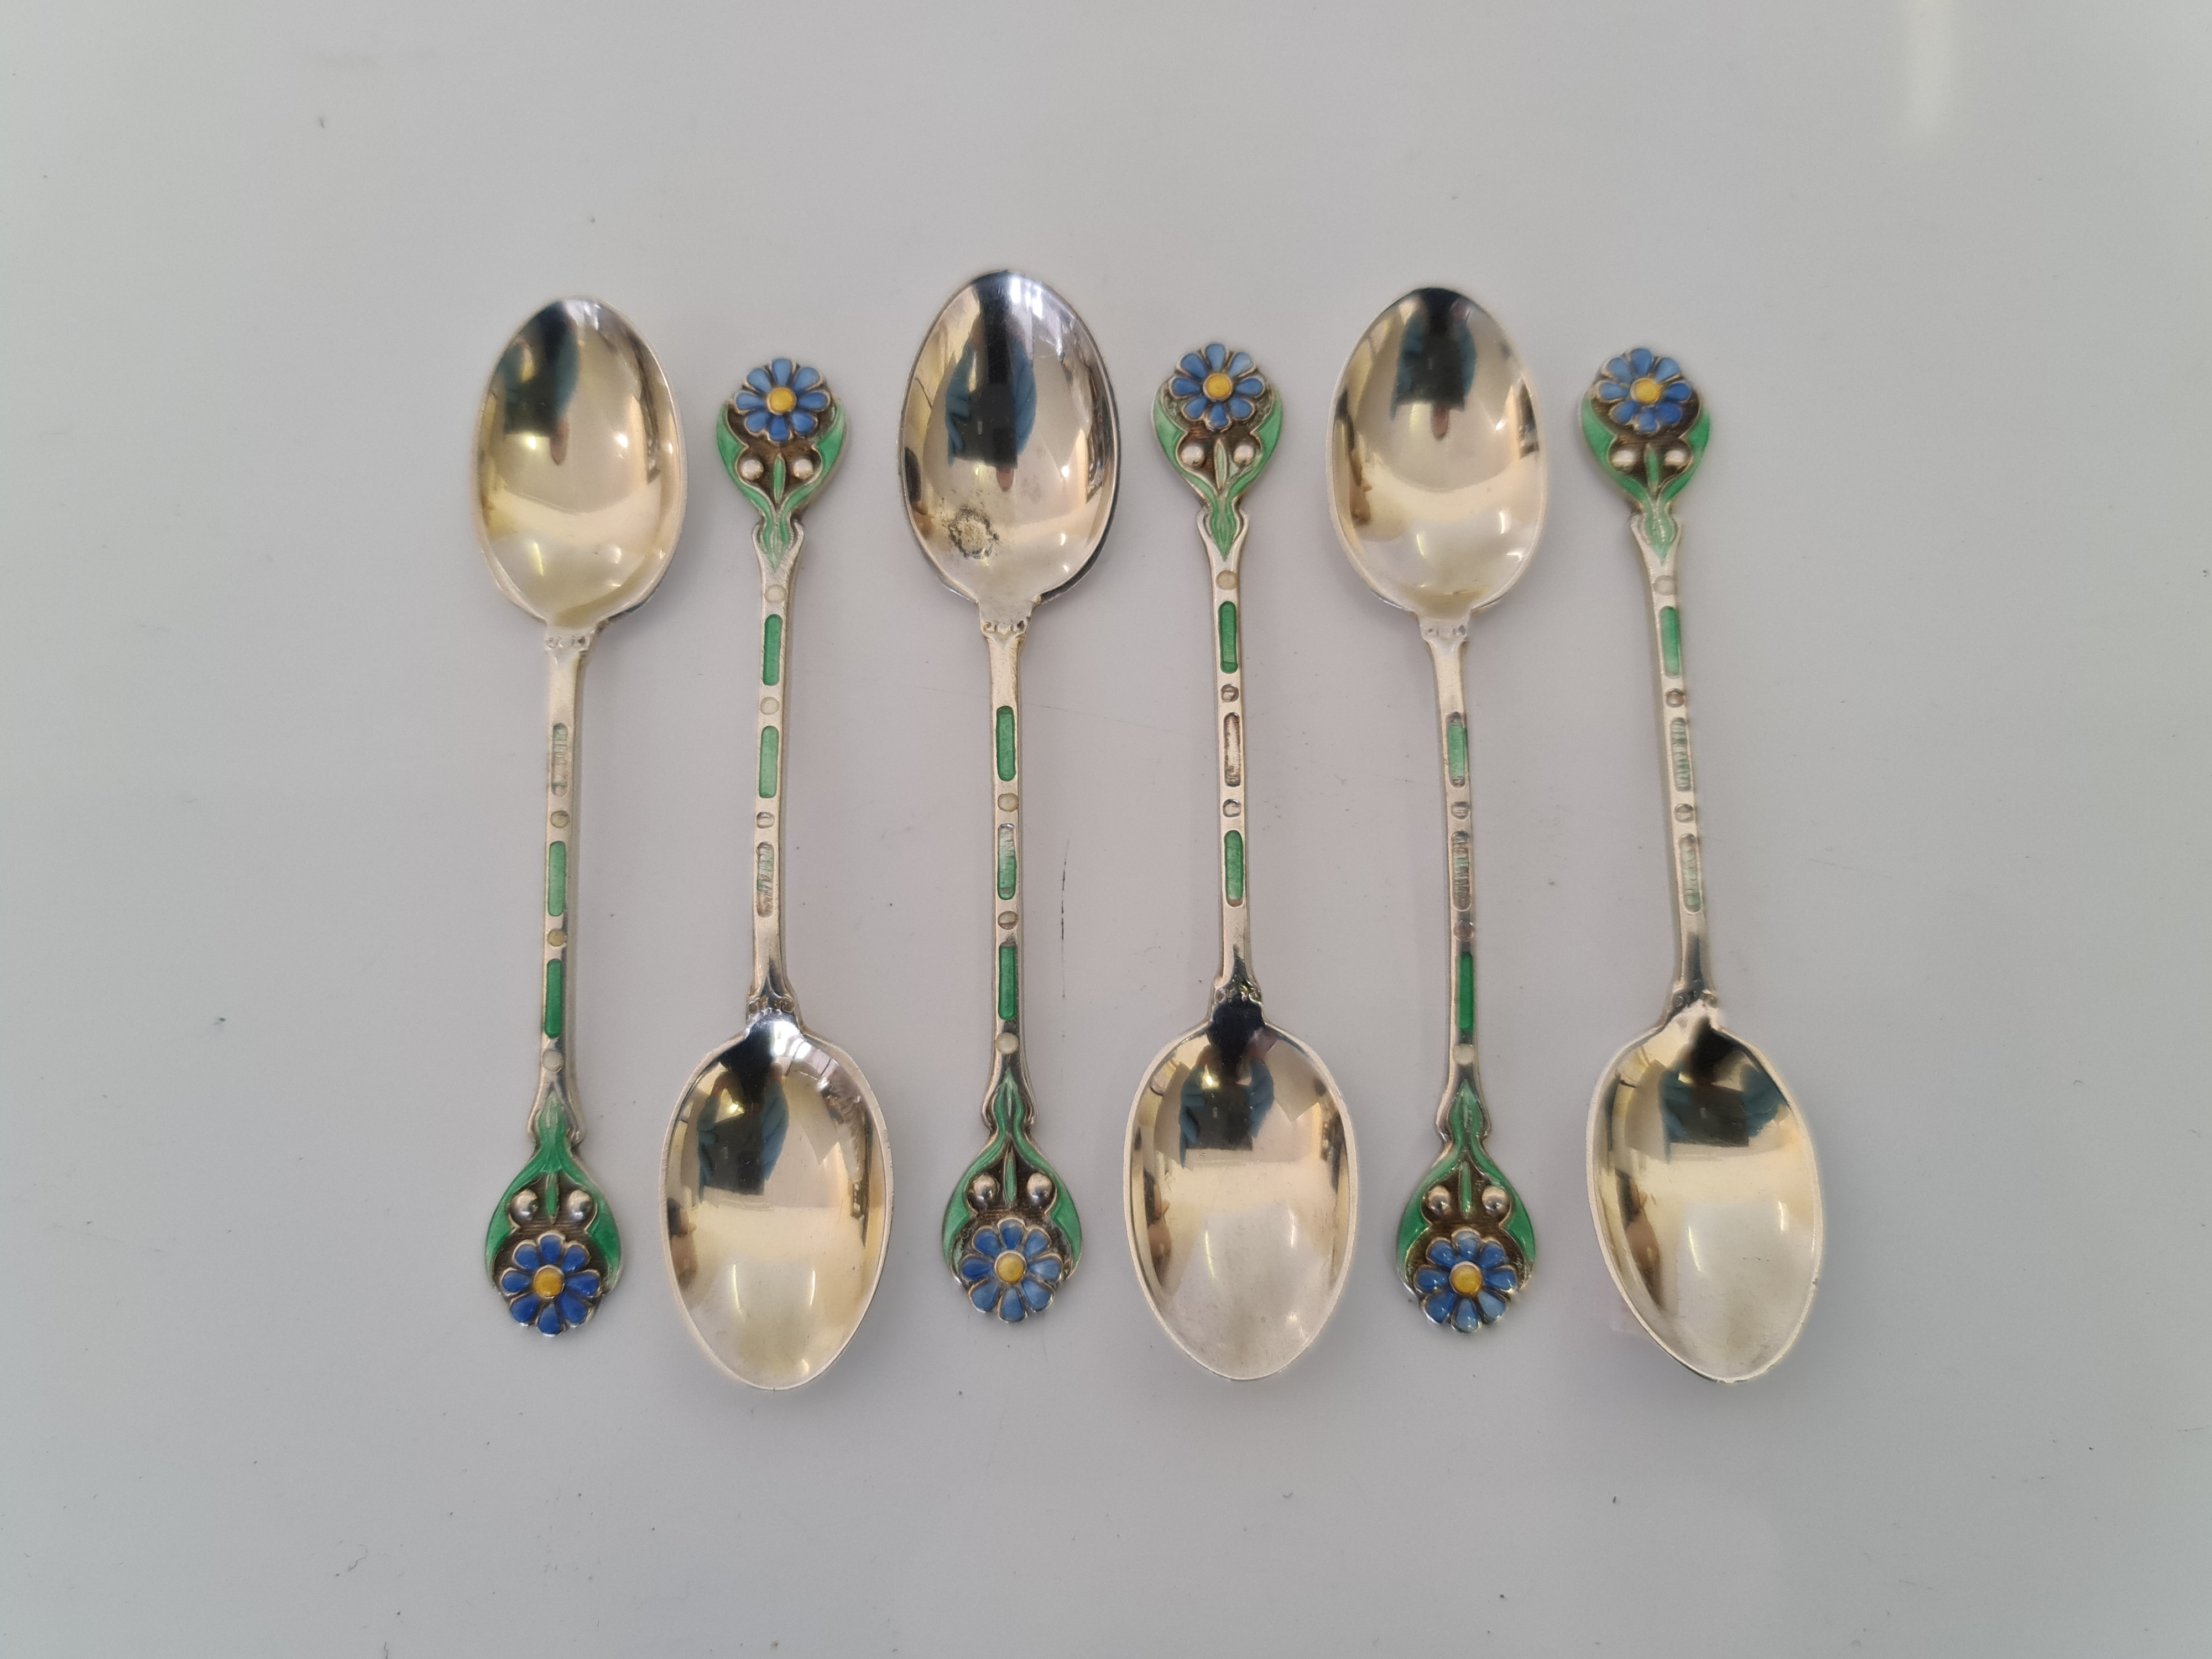 A set of six hallmarked silver and enamel spoons with flower design on handle, approx. weight 53.